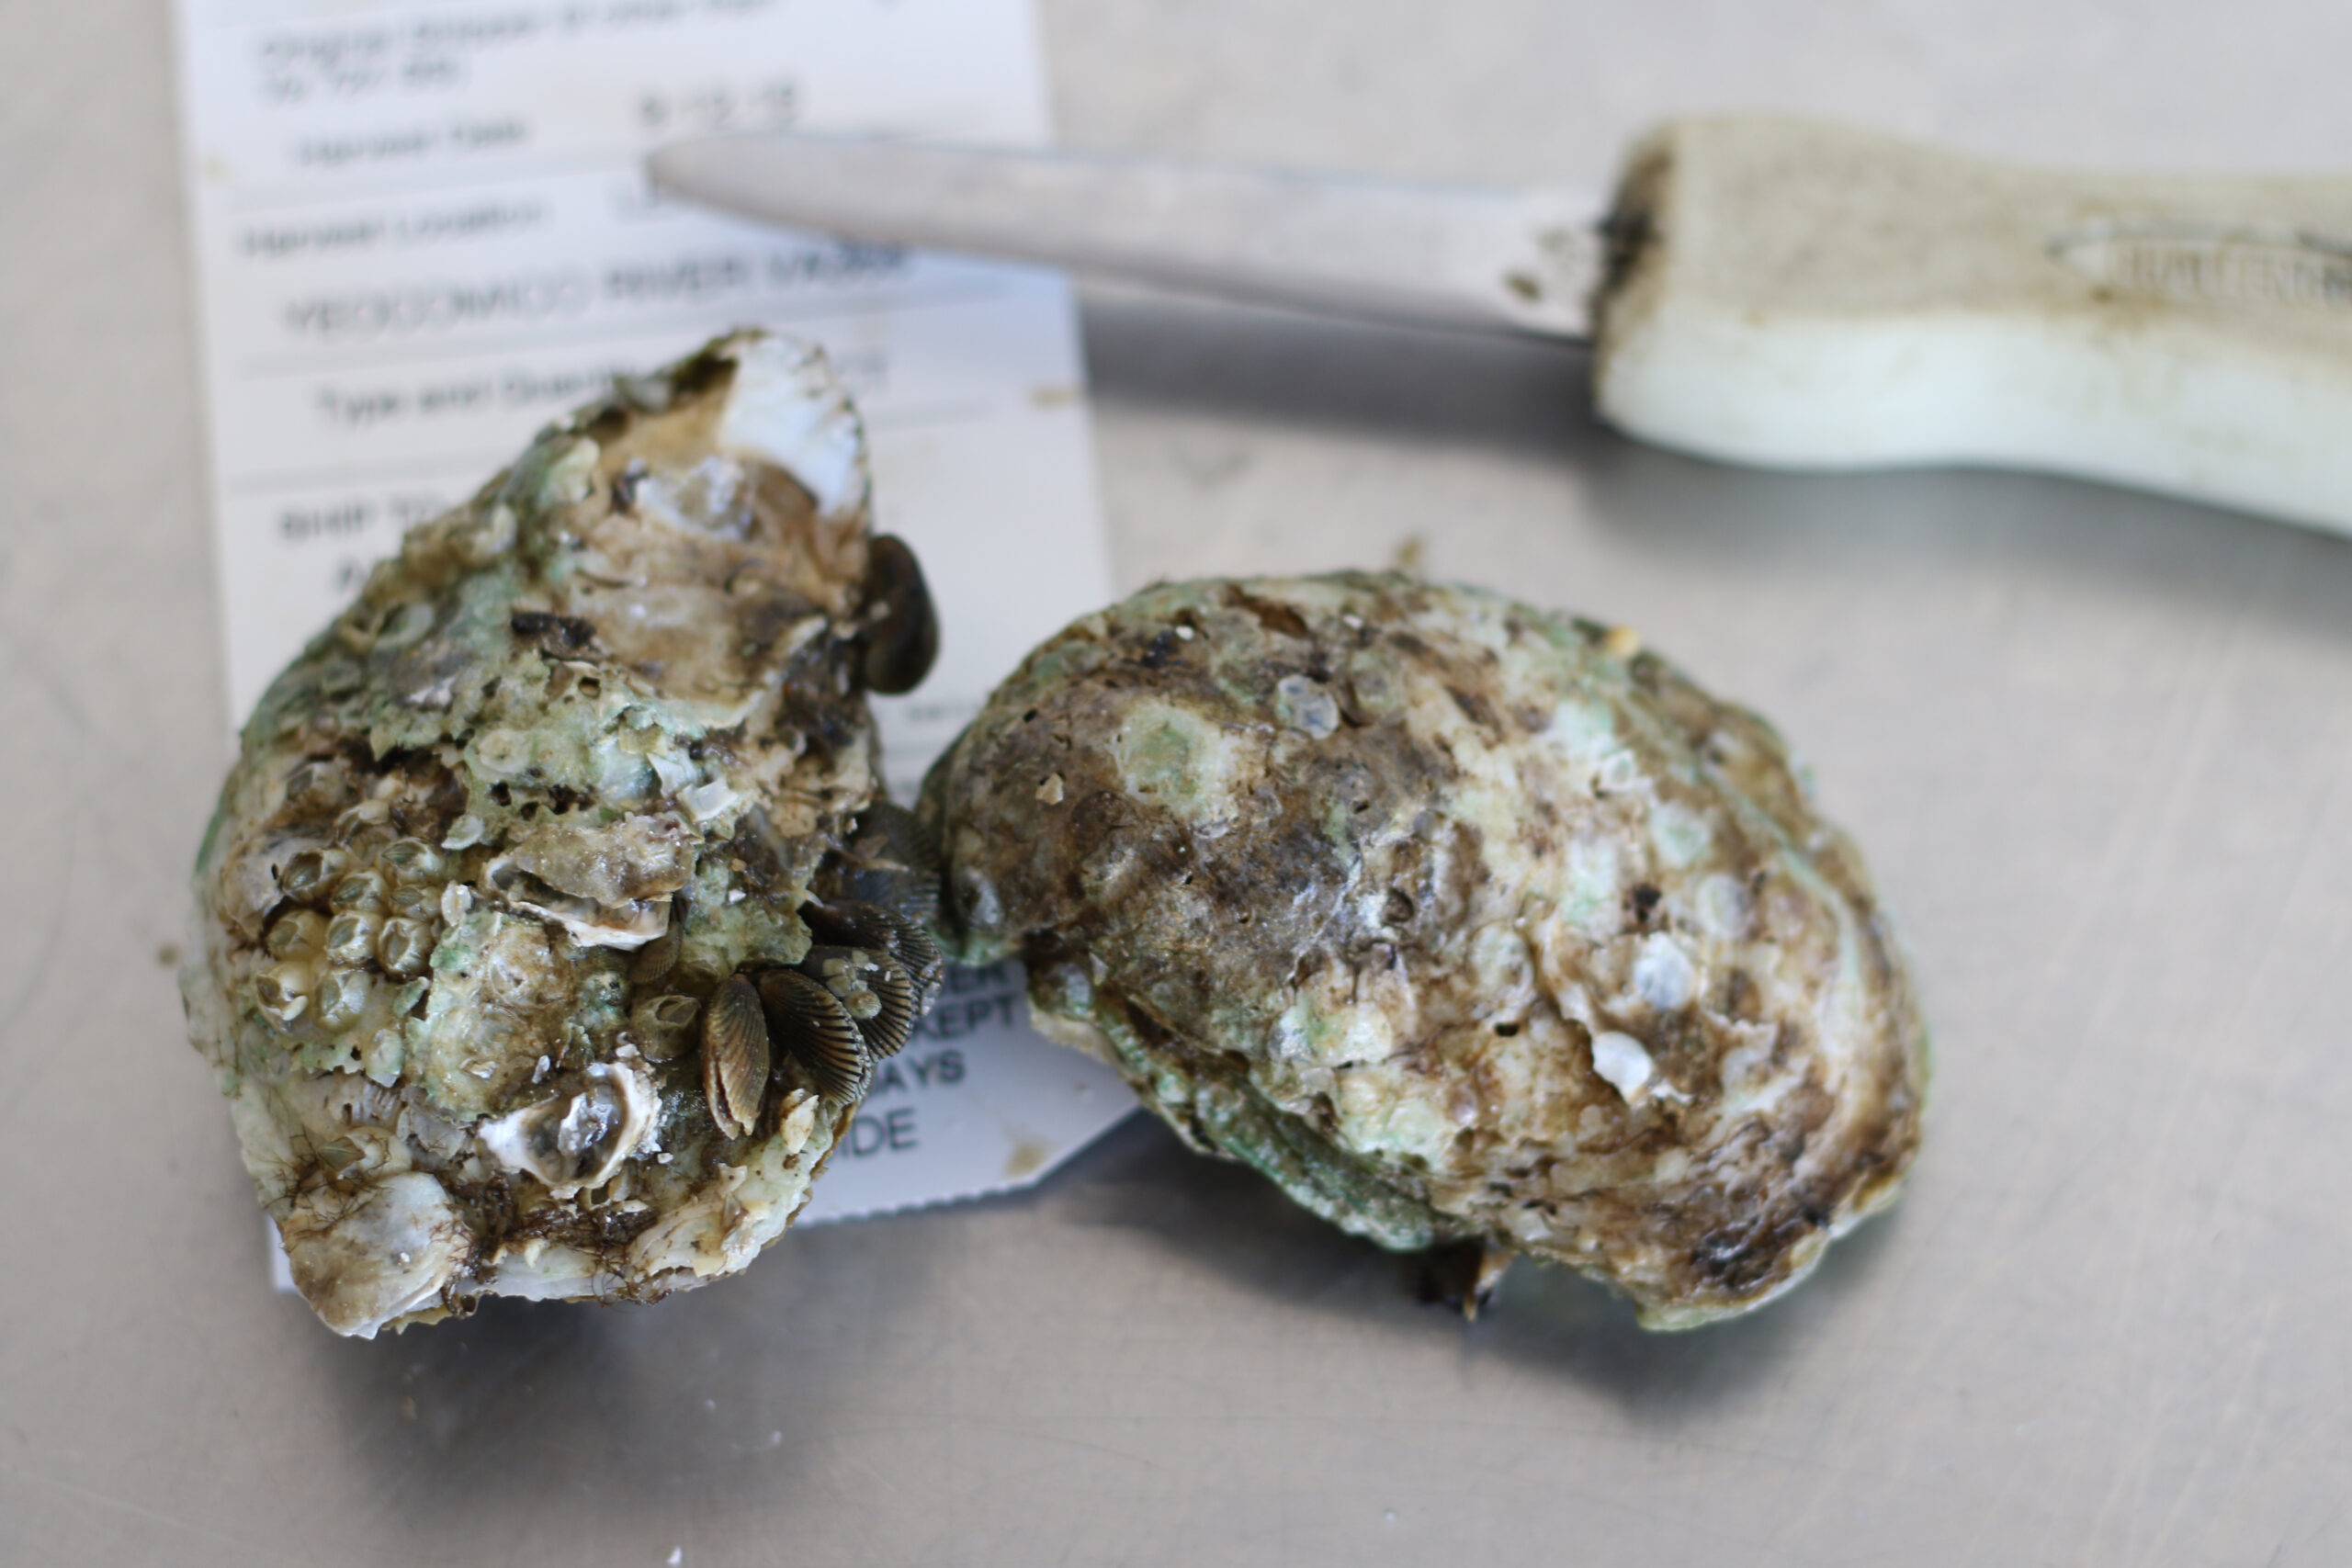 Oysters at Santa Rosa Seafood (Heather Irwin)